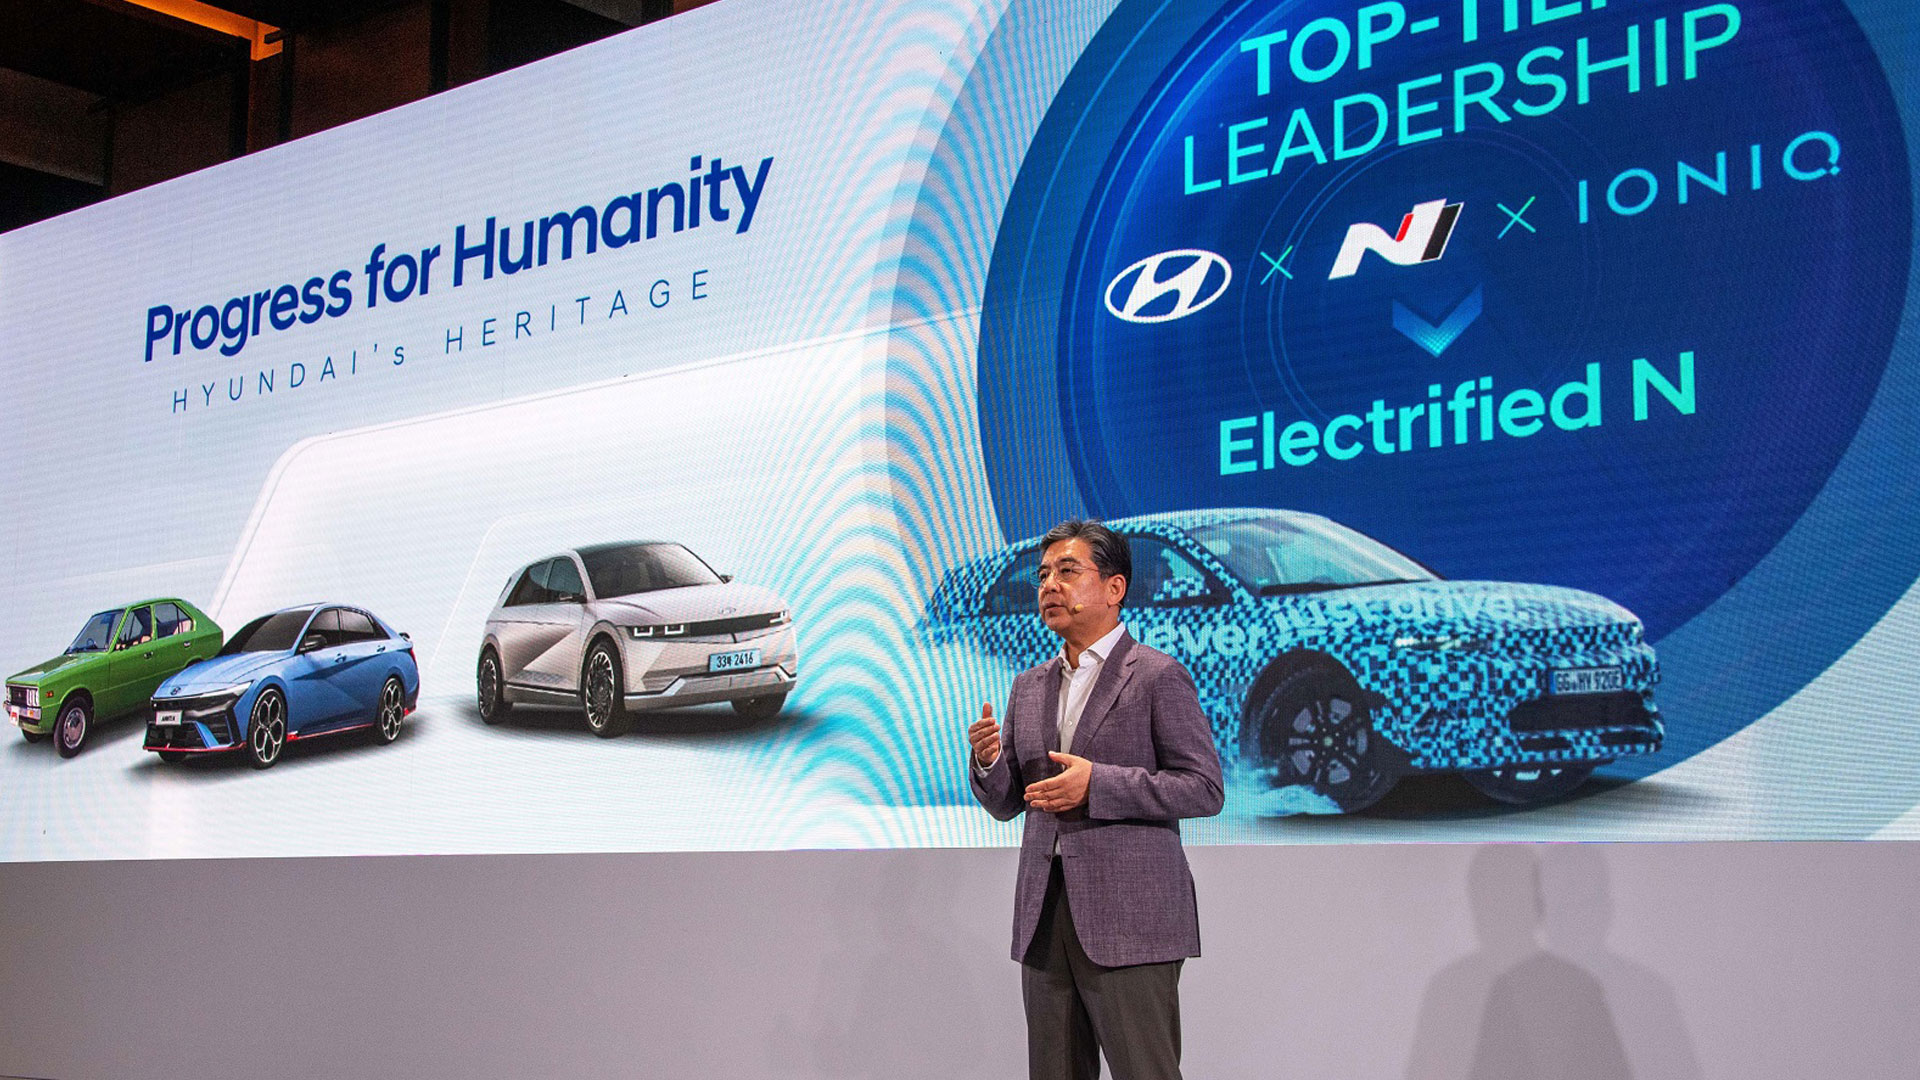 ‘Hyundai Motor Way’ Sets Course for Accelerated Electrification and Future Mobility Goals at 2023 CEO Investor Day